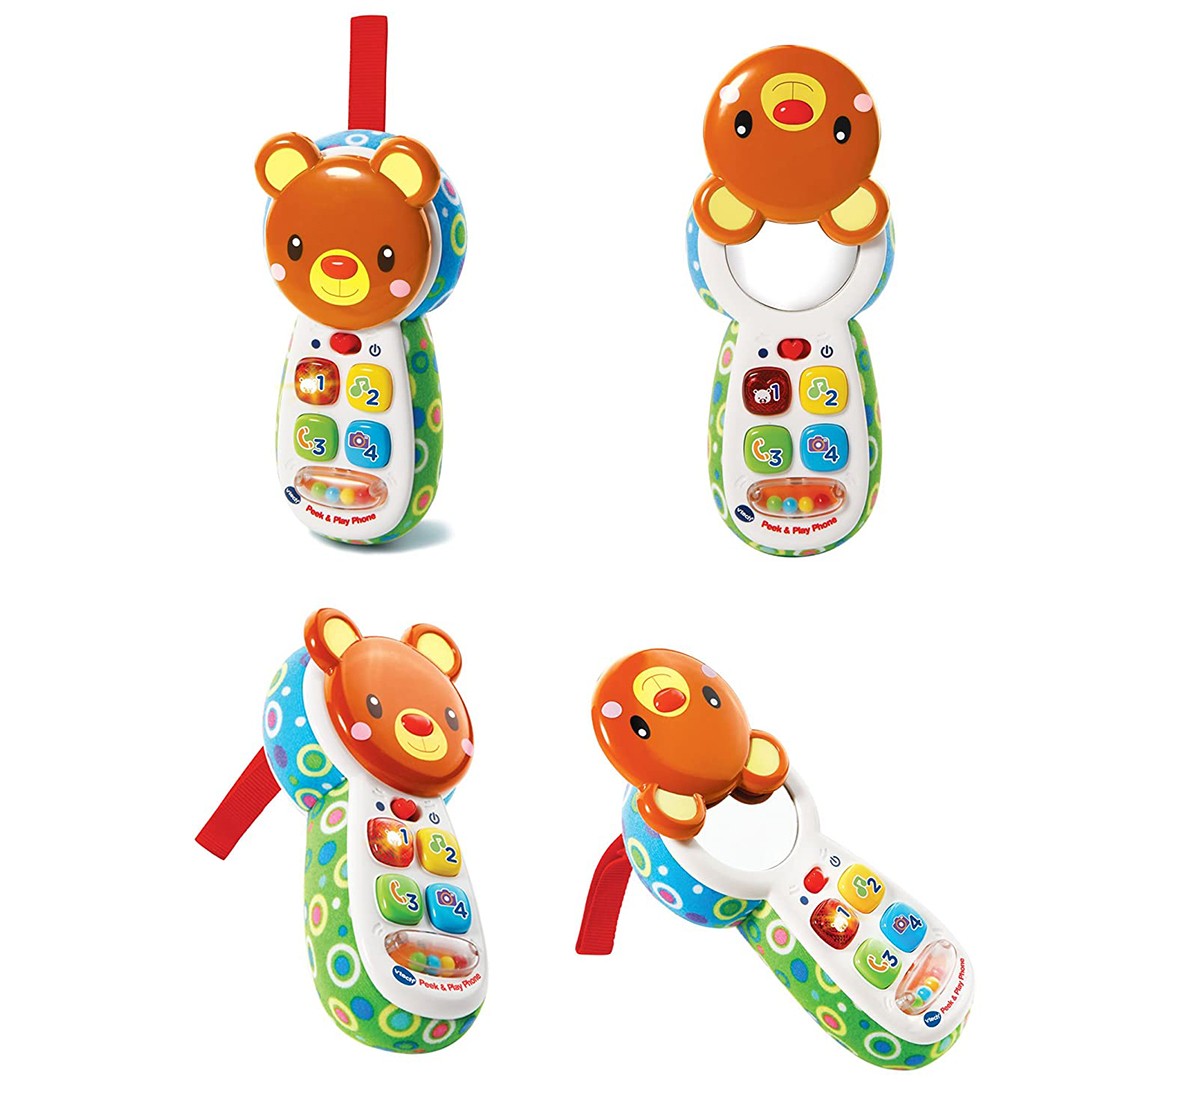  Vtech Peek & Play Phone Activity Toys for Kids age 3M+ 